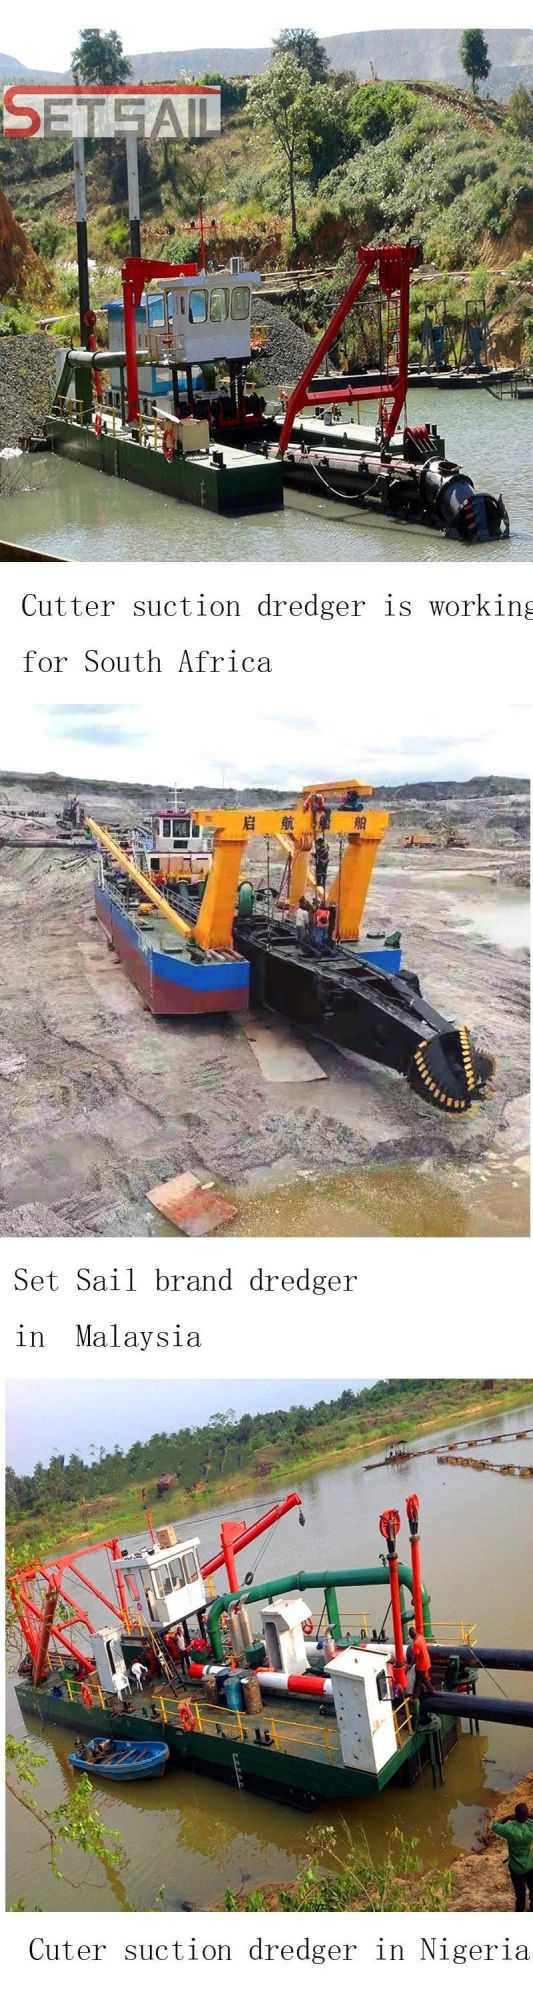 Full New 22 Inch Cutter Suction Dredger with Depth Meter